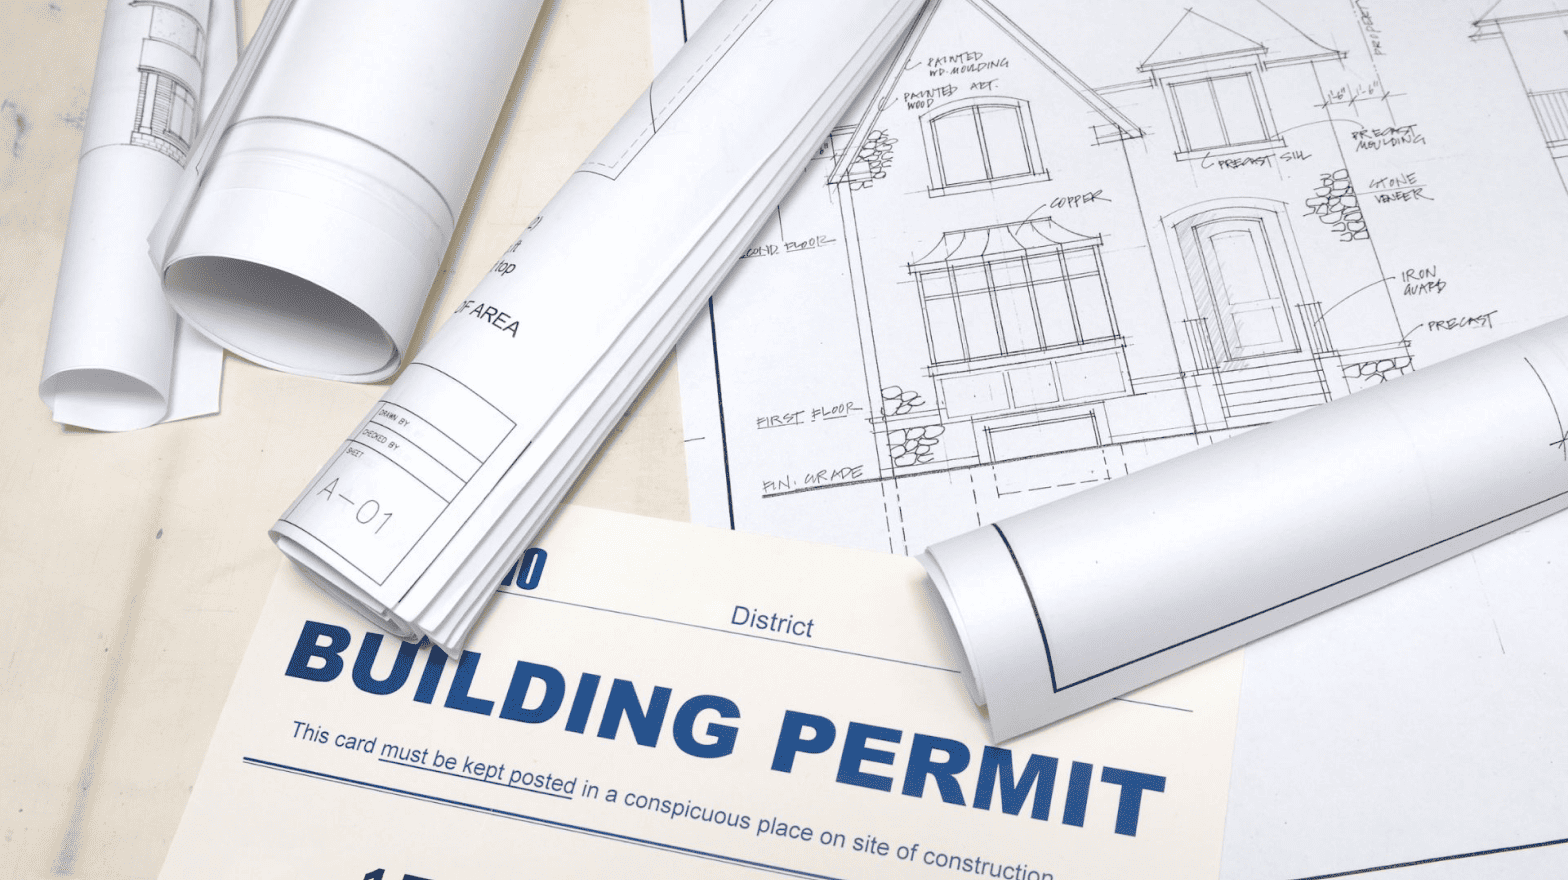 Blueprints of a residential building and a building permit.